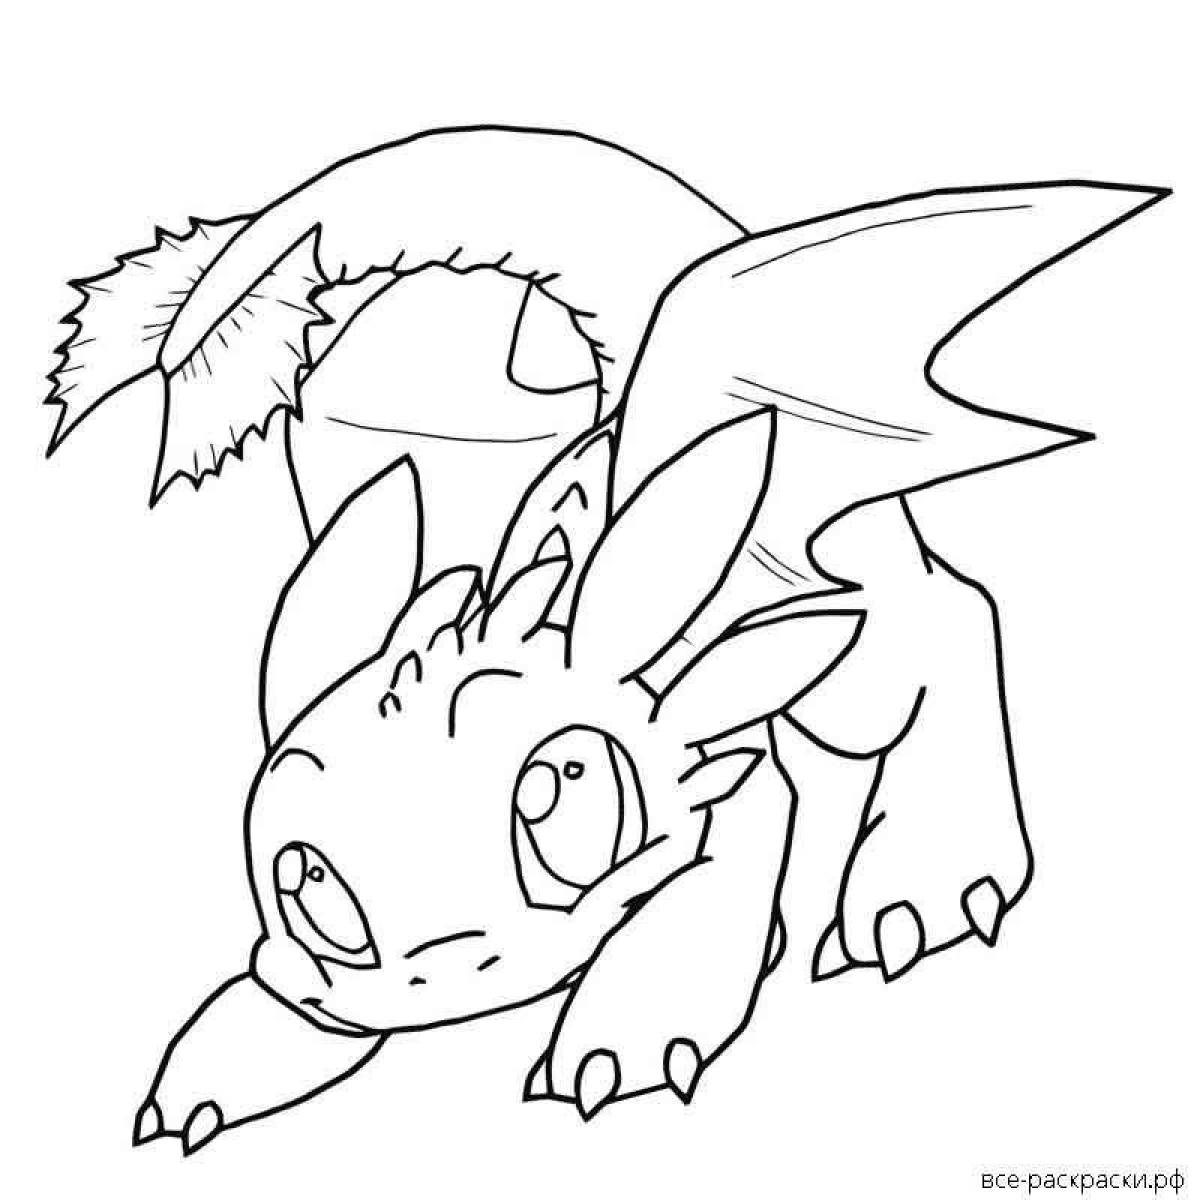 Generous night fury coloring page